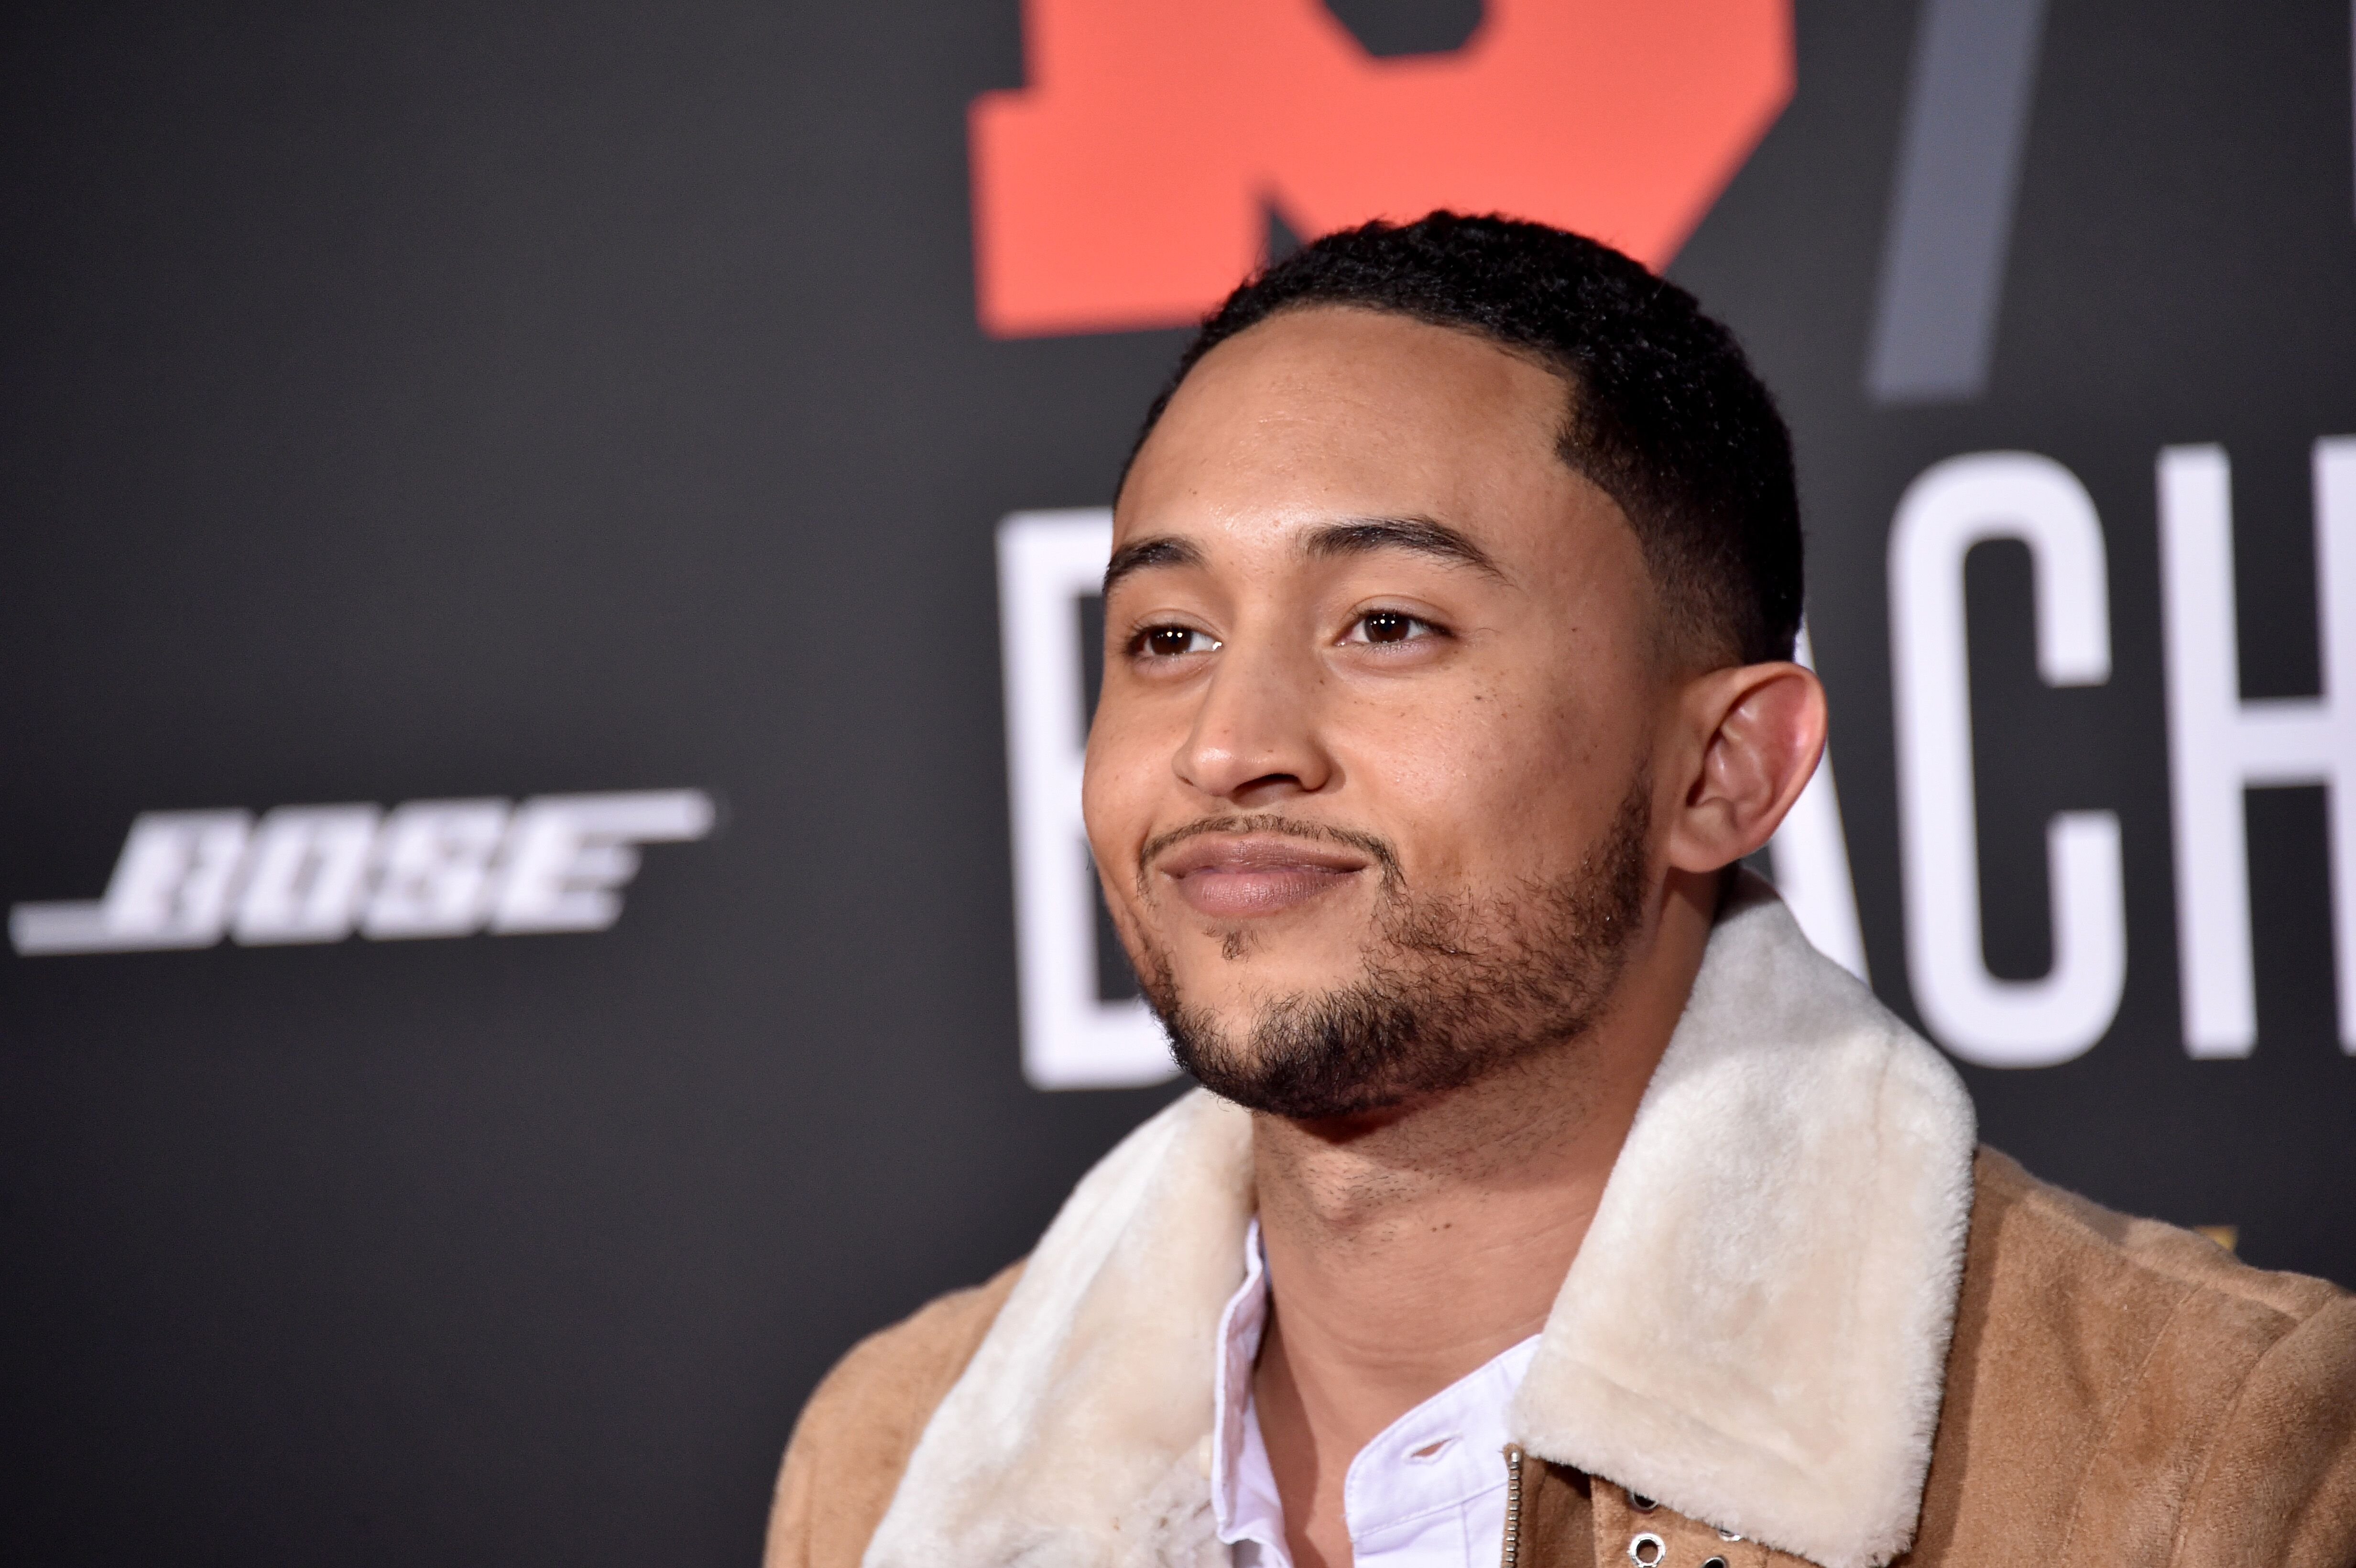 Tahj Mowry at Bleacher Report's "Bleacher Ball" event in San Francisco in 2016 | Source: Getty Images